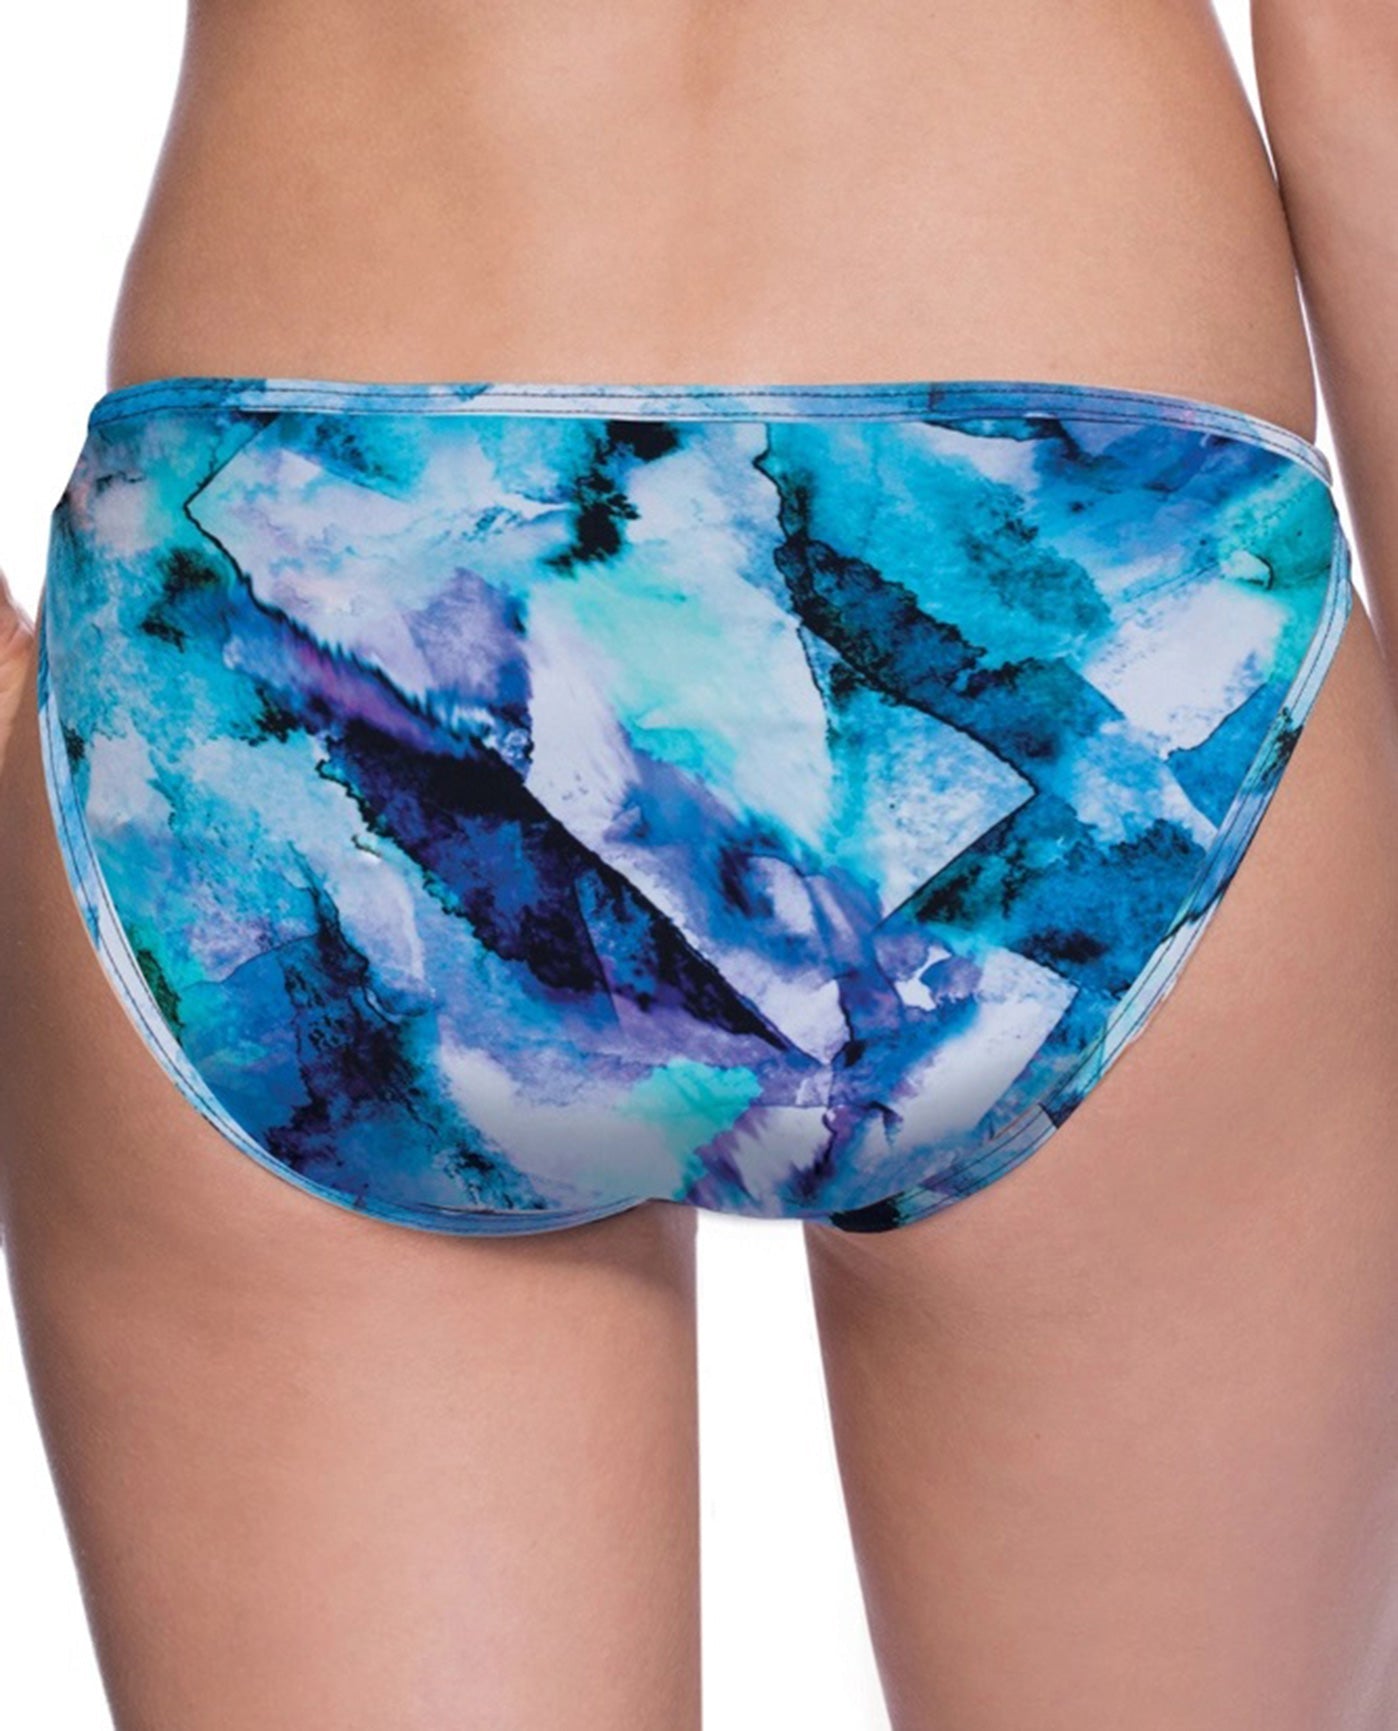 Back View Of Free Sport Moonstone Low Rise Hipster Swim Bottom | FREE SPORT MOONSTONE BLUE